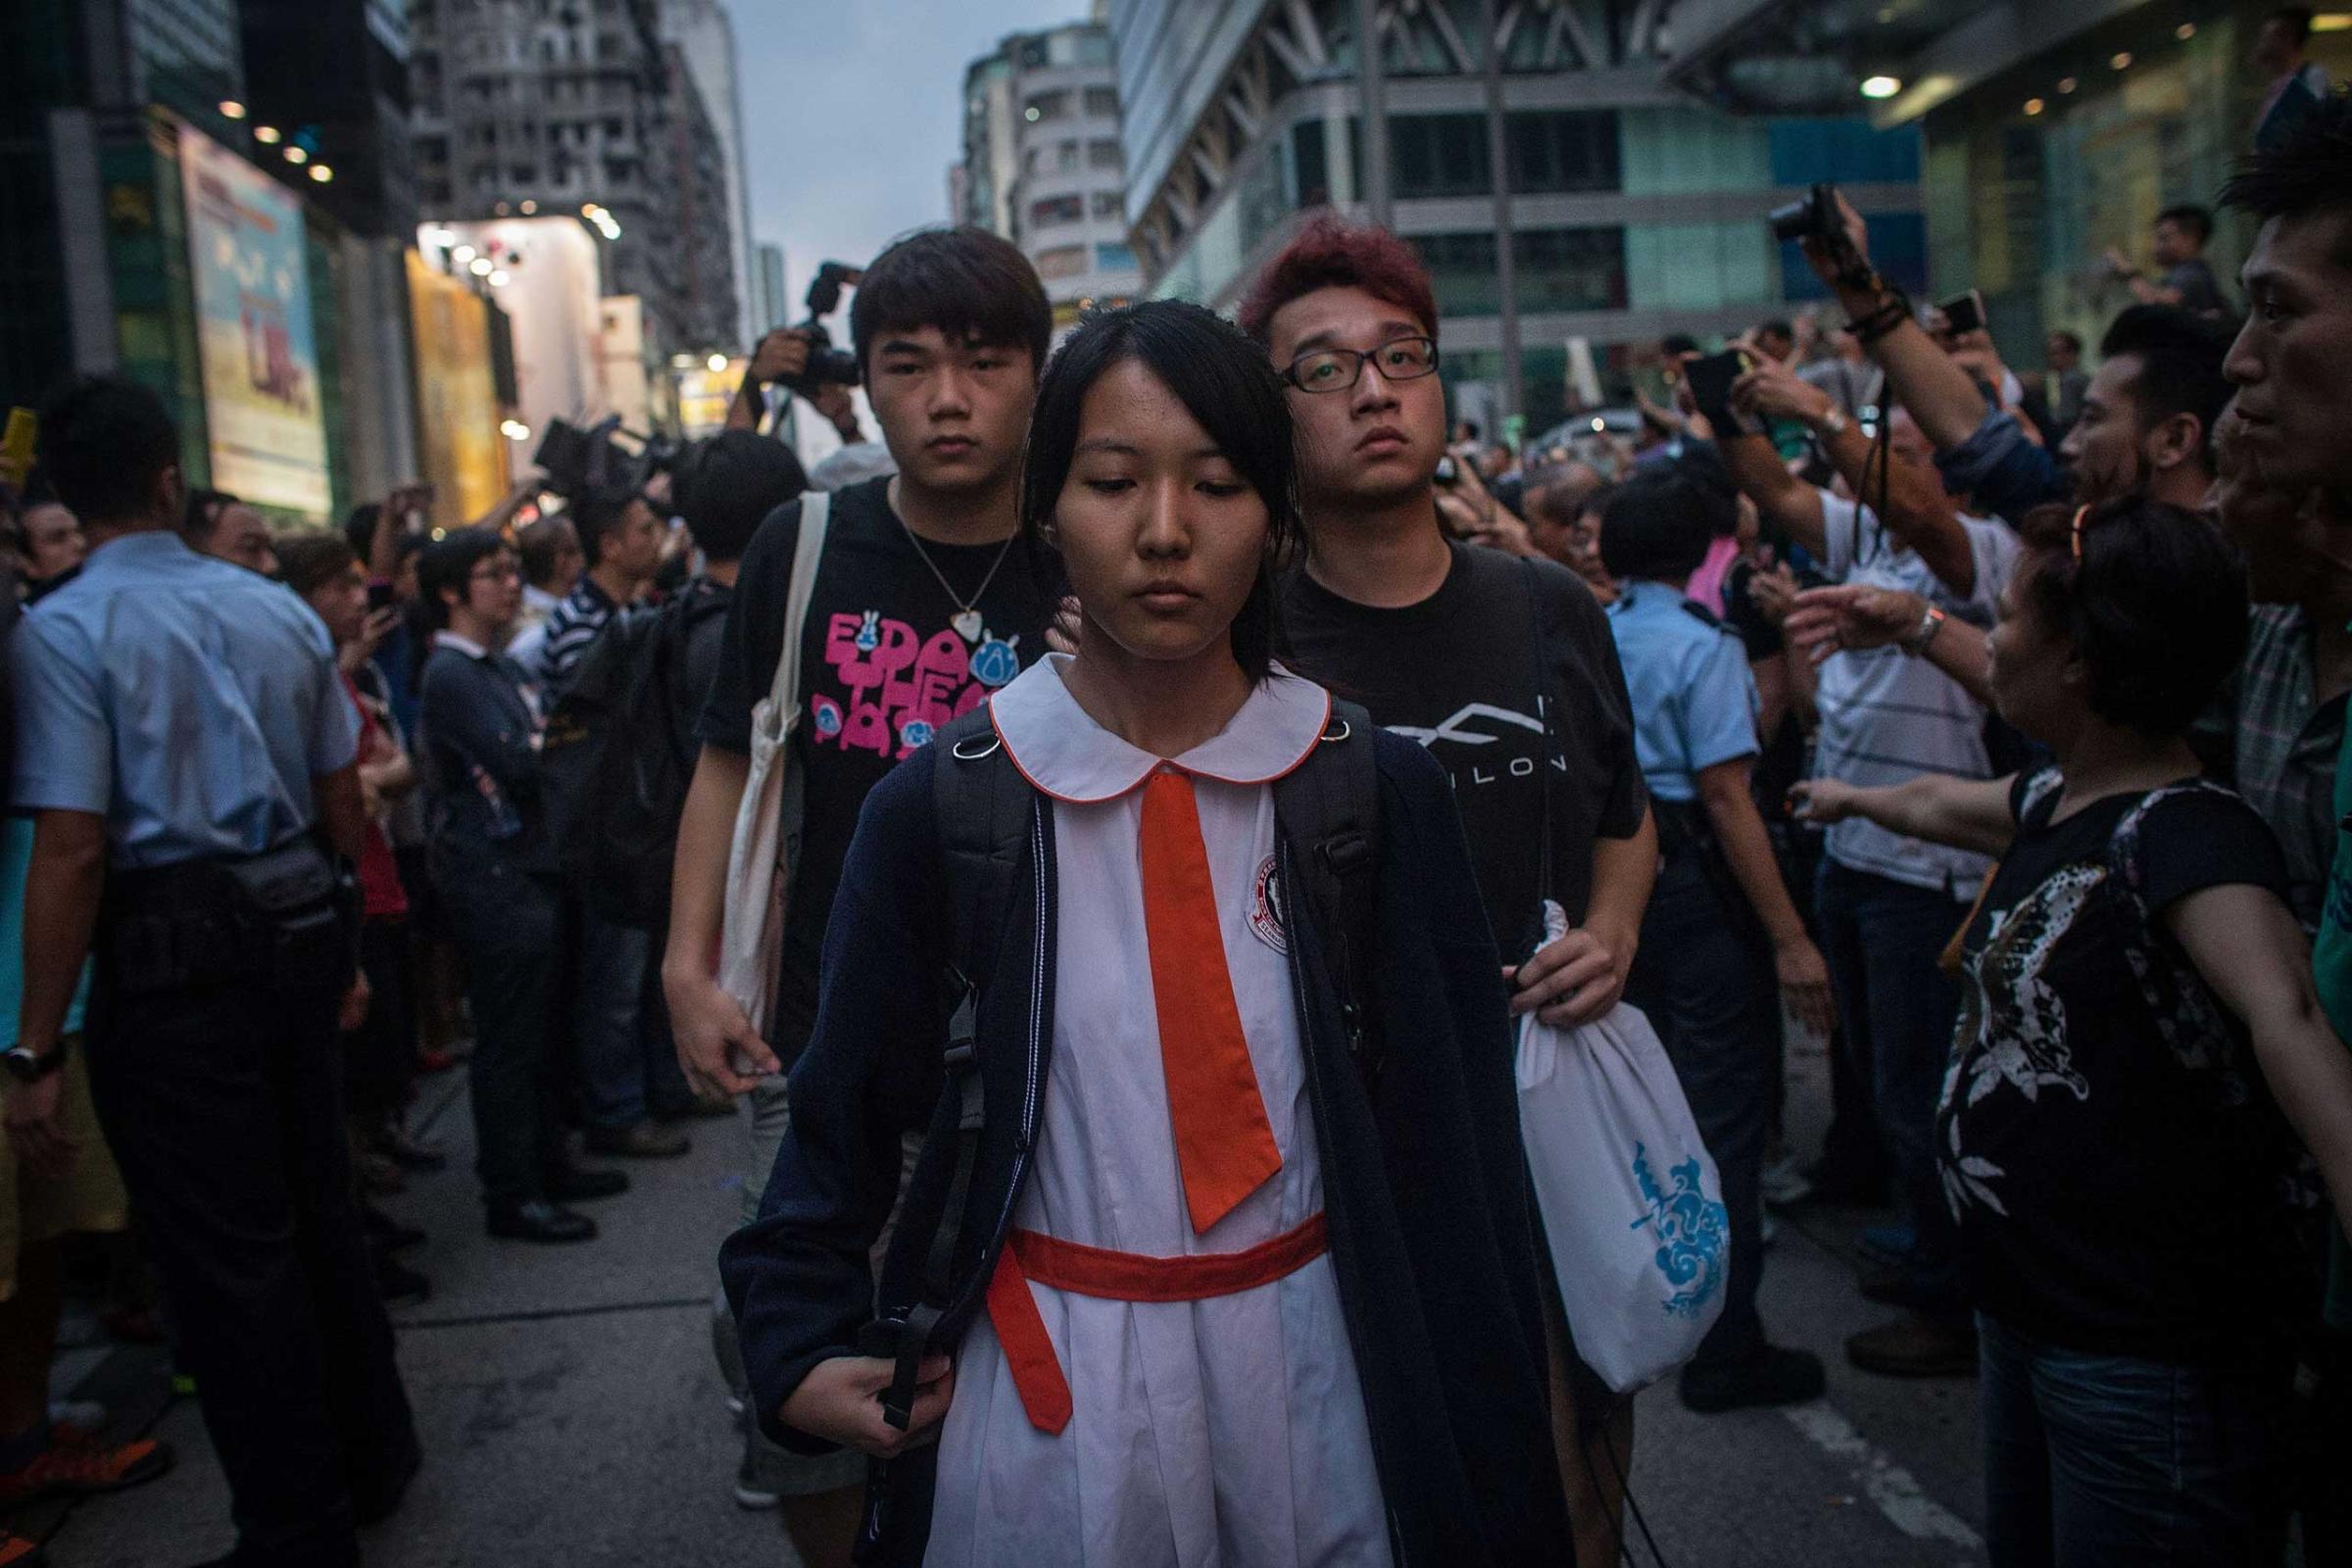 Students and pro-democracy activists leave the protest site as local police hold back local residents and pro-government supporters on Oct. 3, 2014 in Mong Kok, Hong Kong.